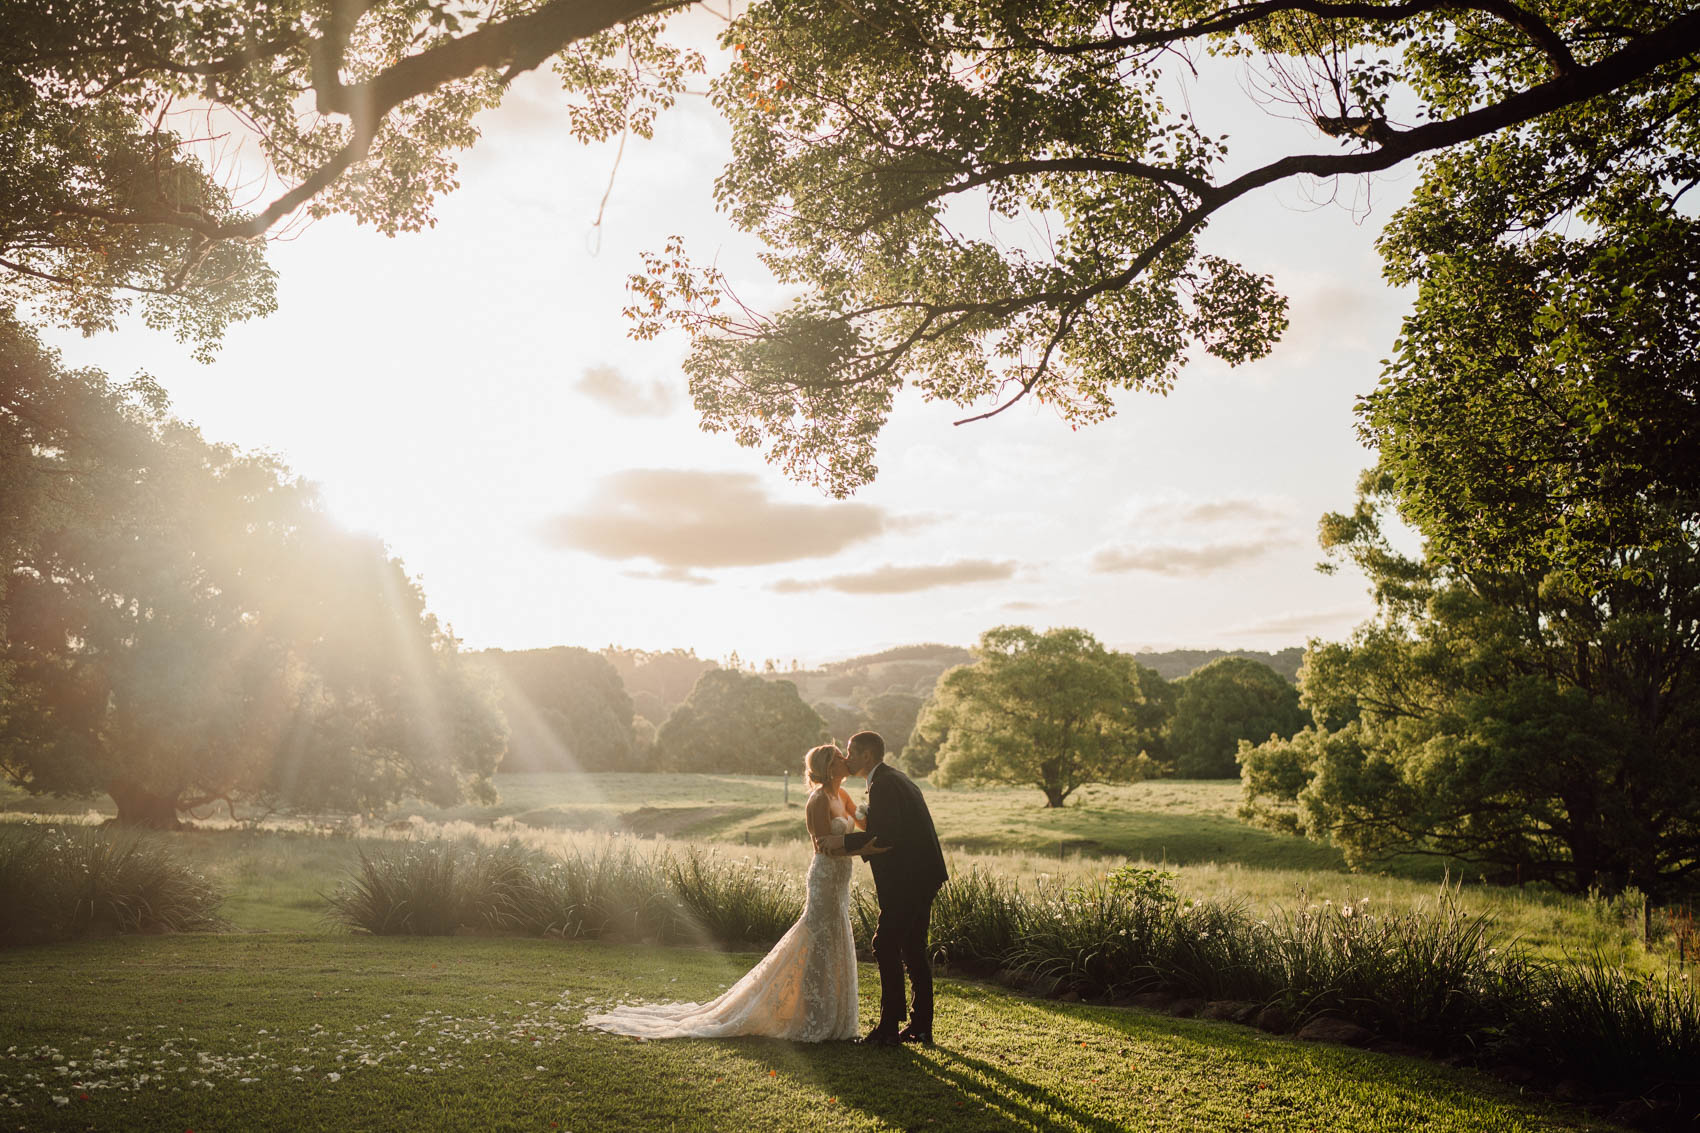 Bride and groom kissing under a tree at sunset at Frida's Field